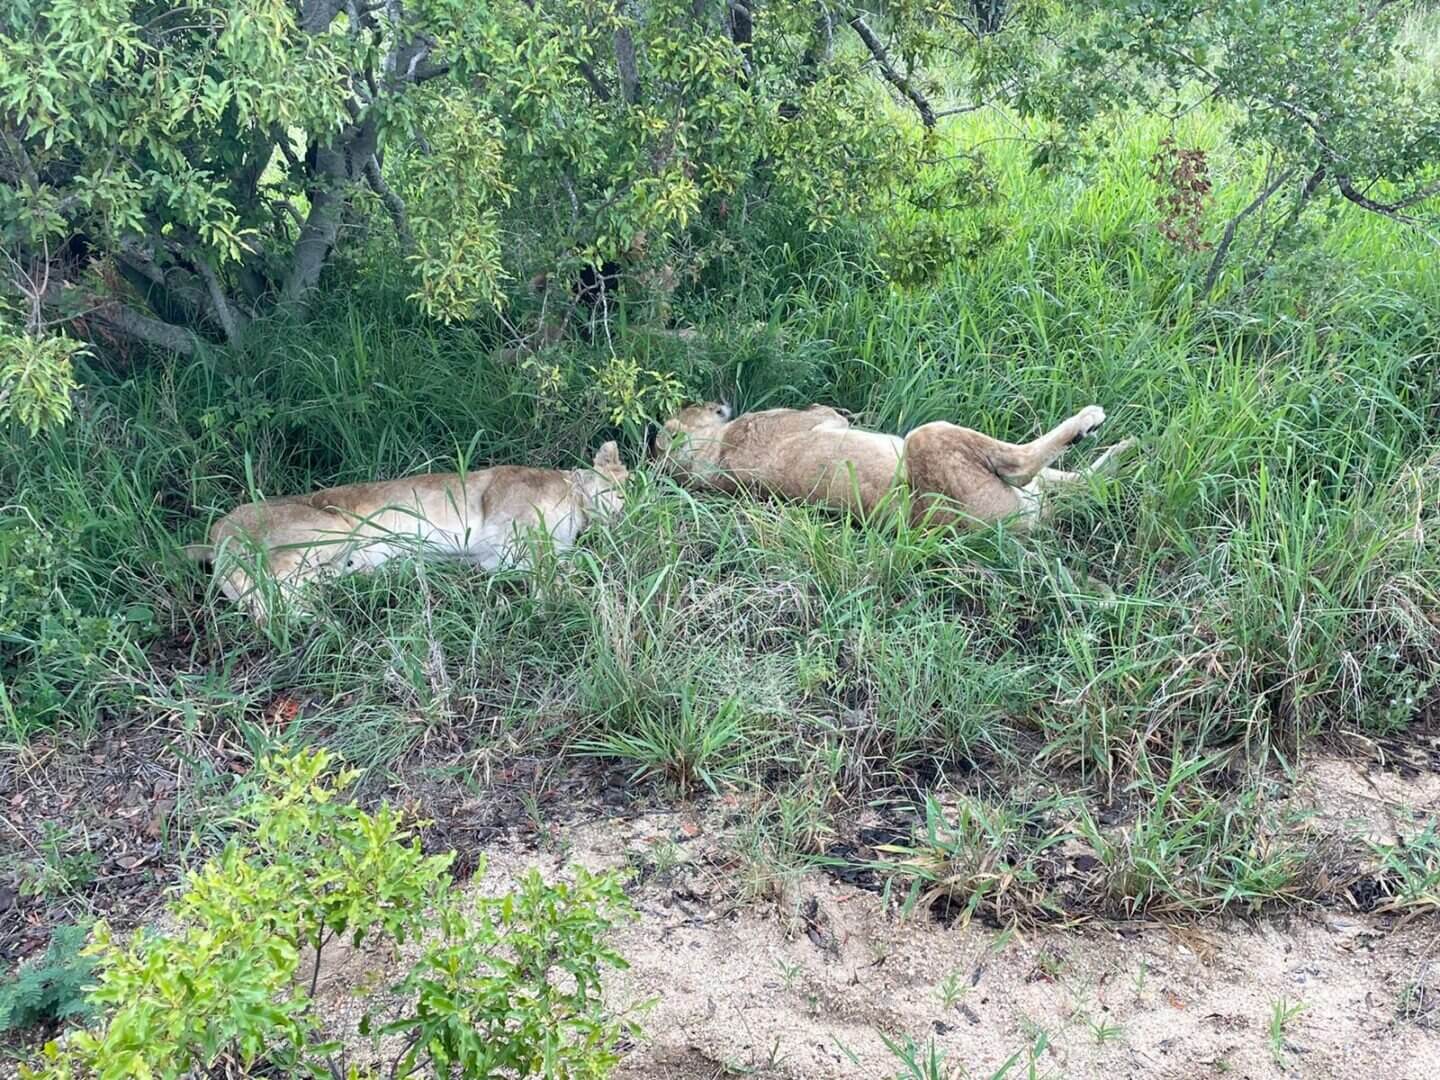 Two lions are laying down in the grass.